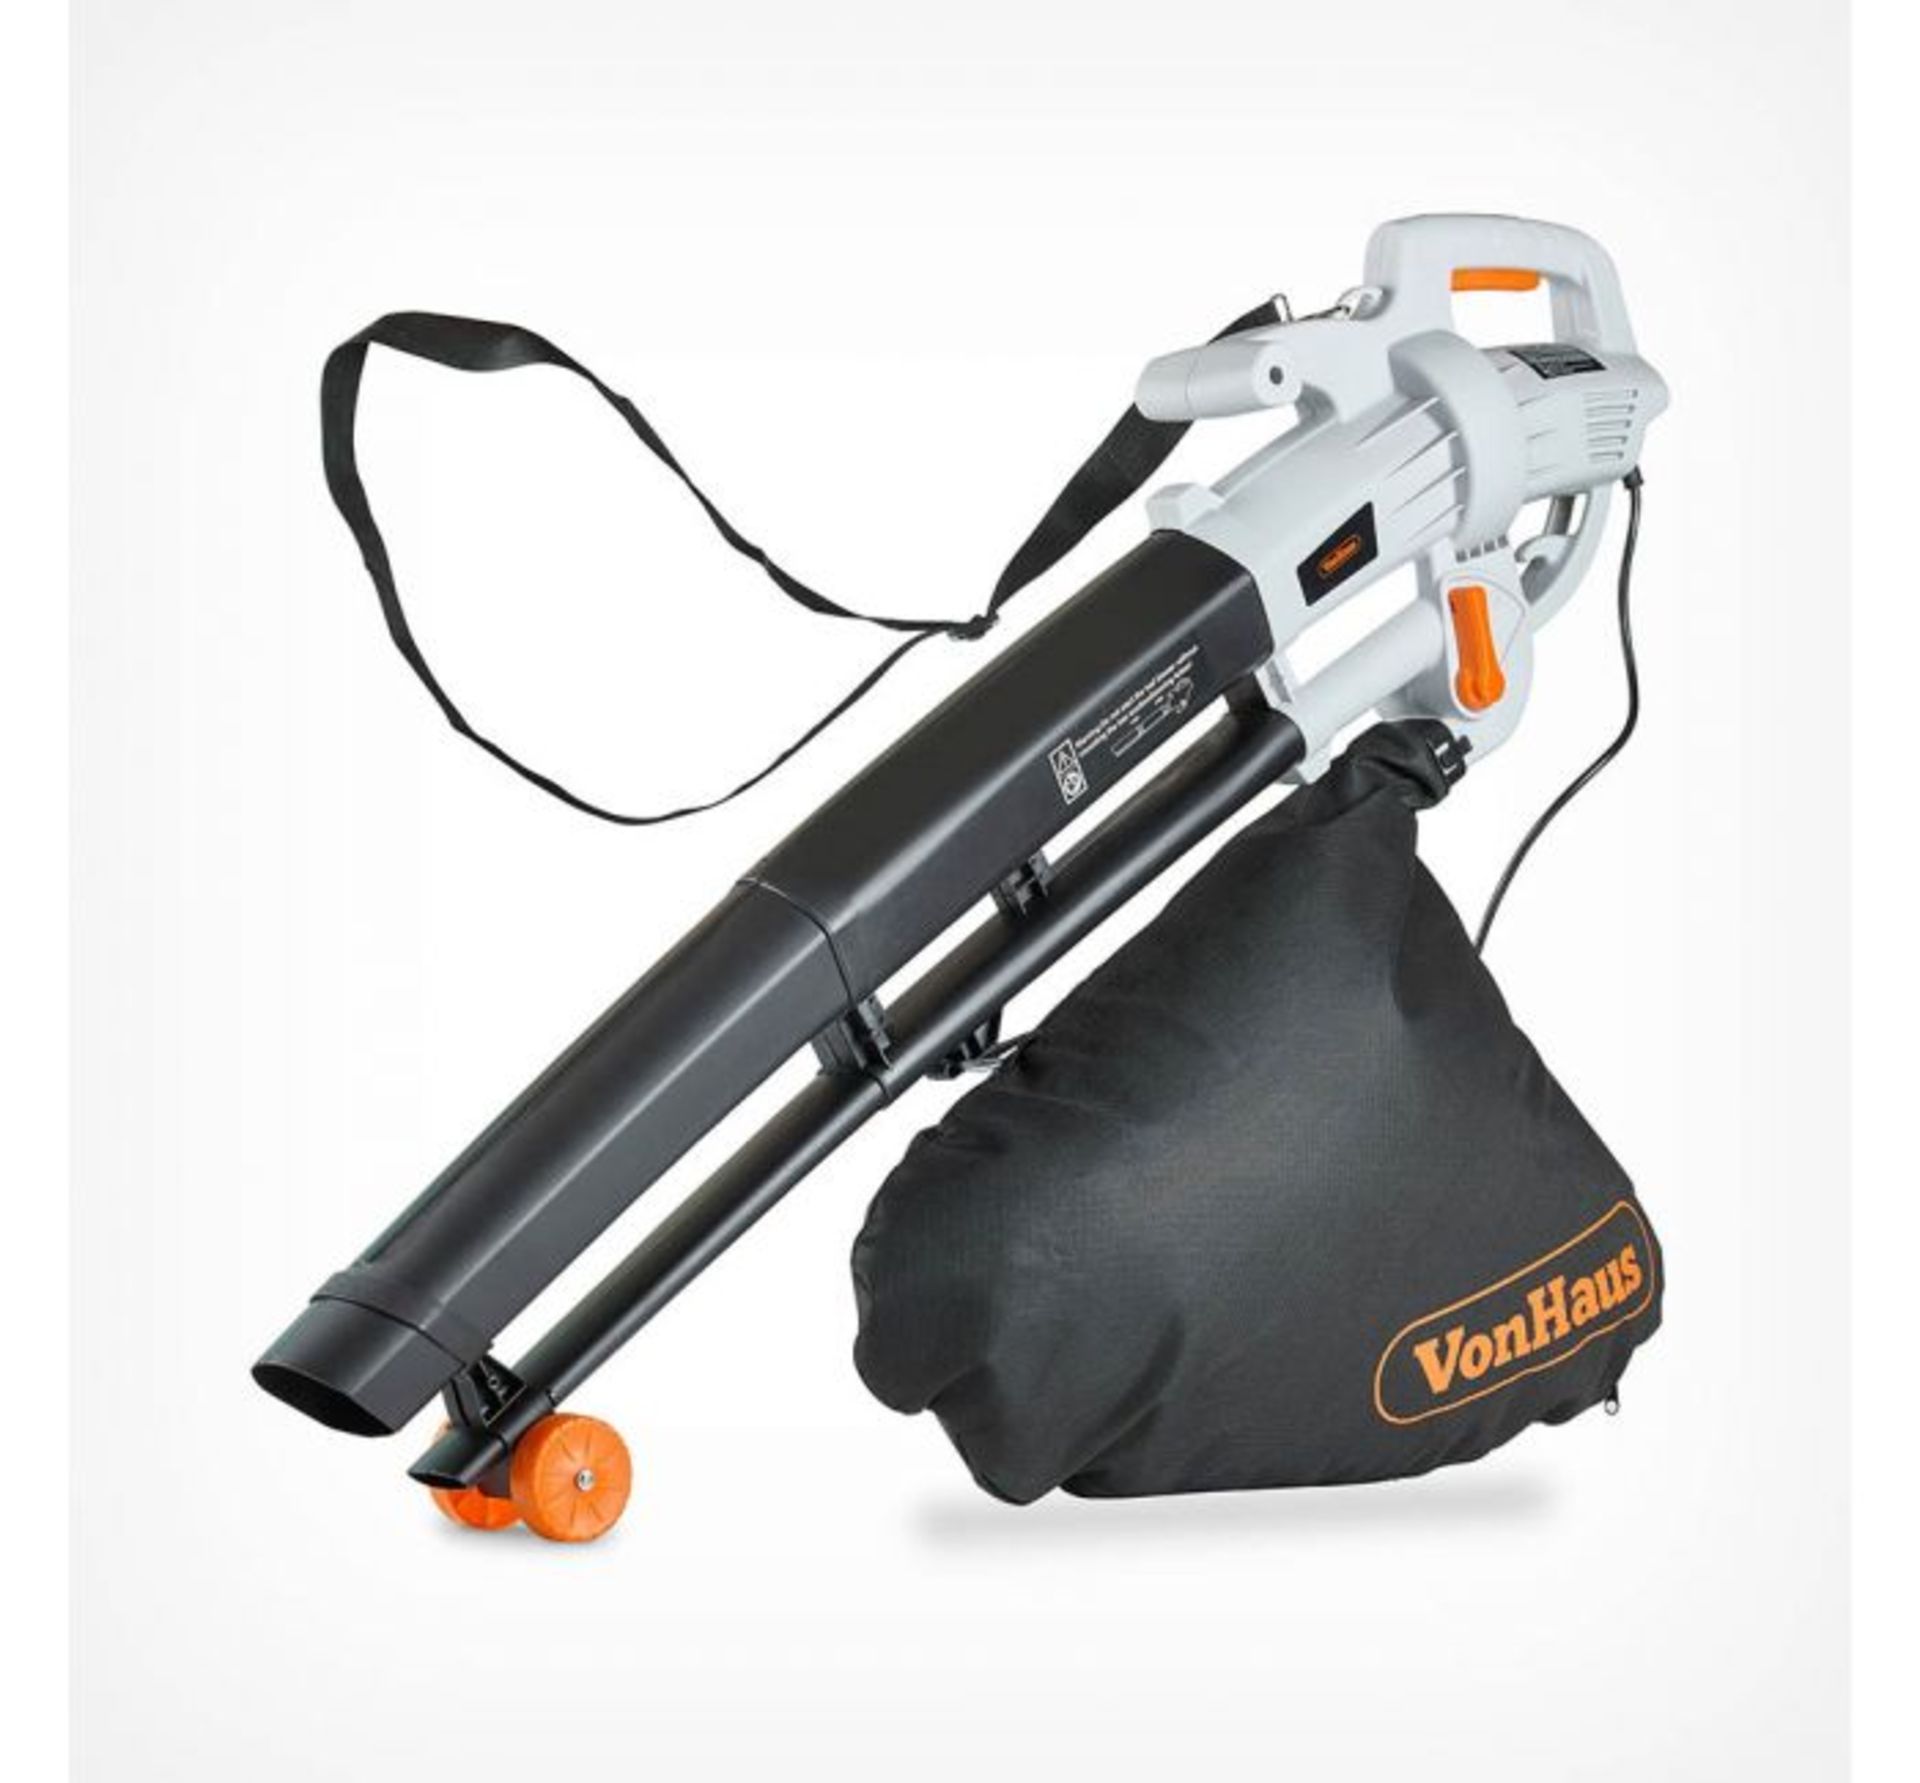 (GL38) 3000W Leaf Blower Powerful 3000W motor blows, vacuums and mulches leaves Automatic mul... - Image 2 of 2